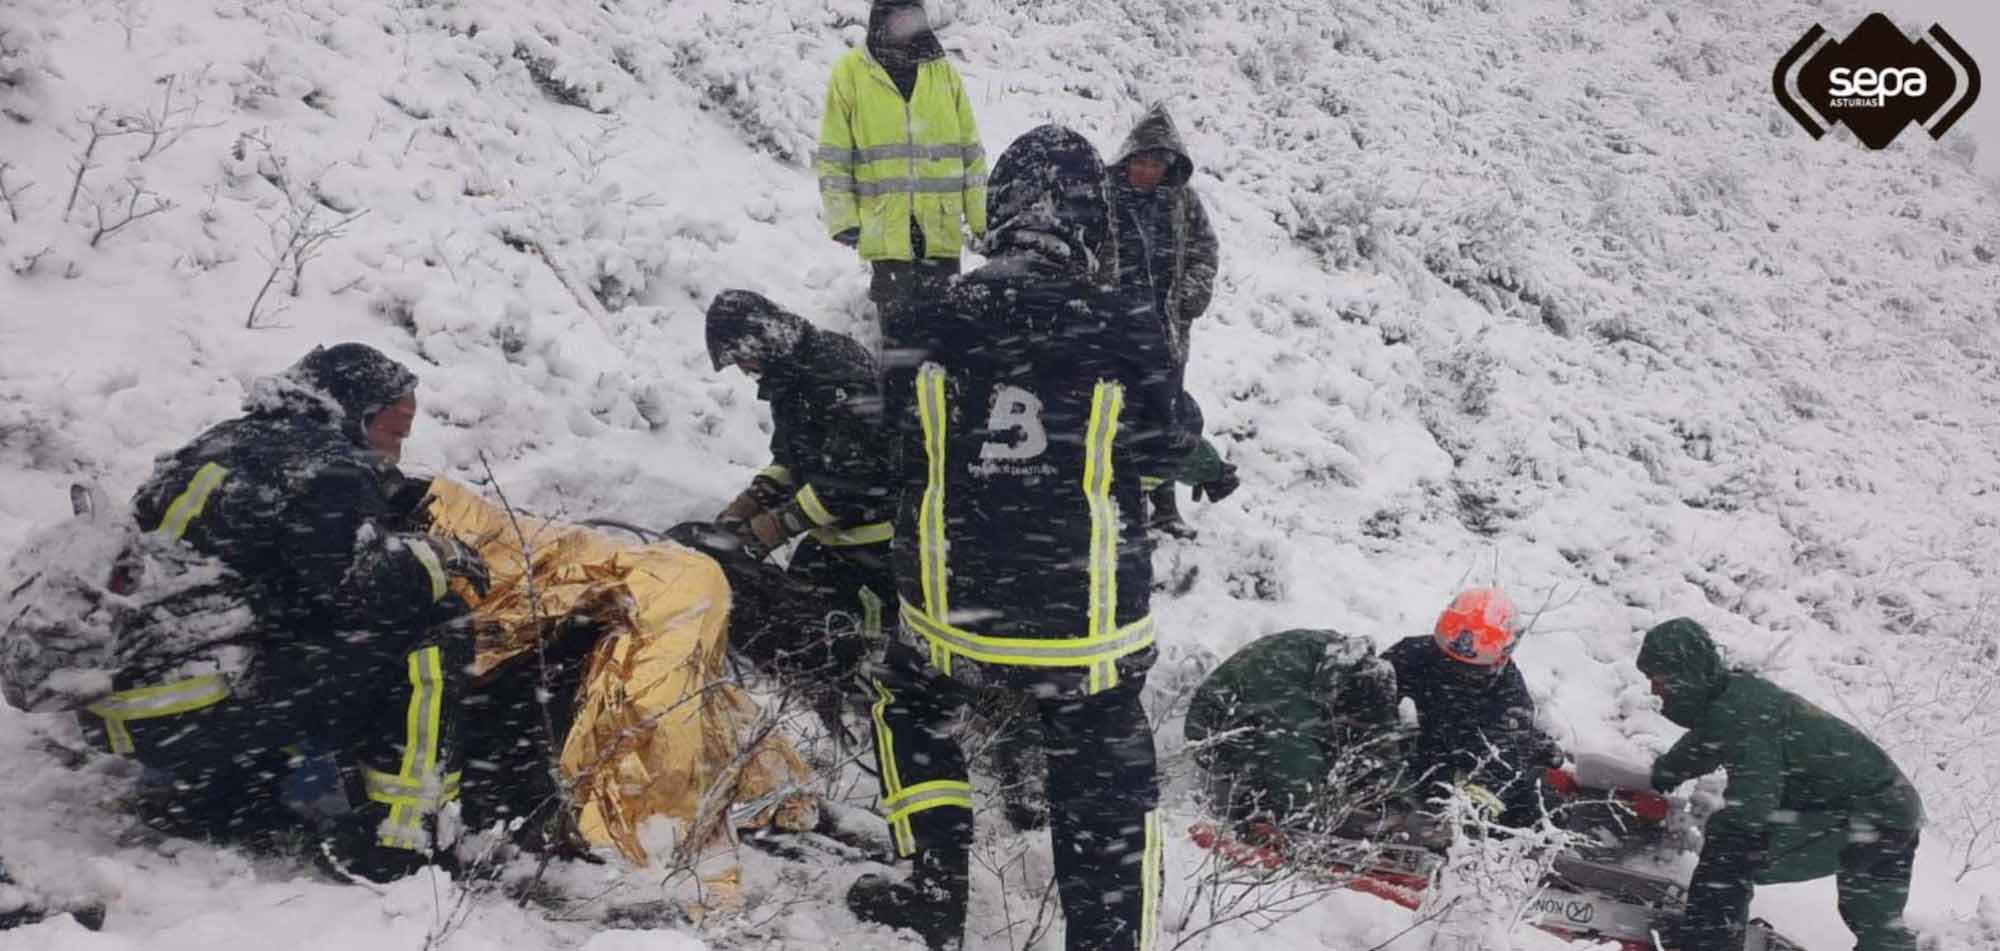 Incredible Two-Hour Long Rescue Of Farmer Stuck On Mountain During Blizzard